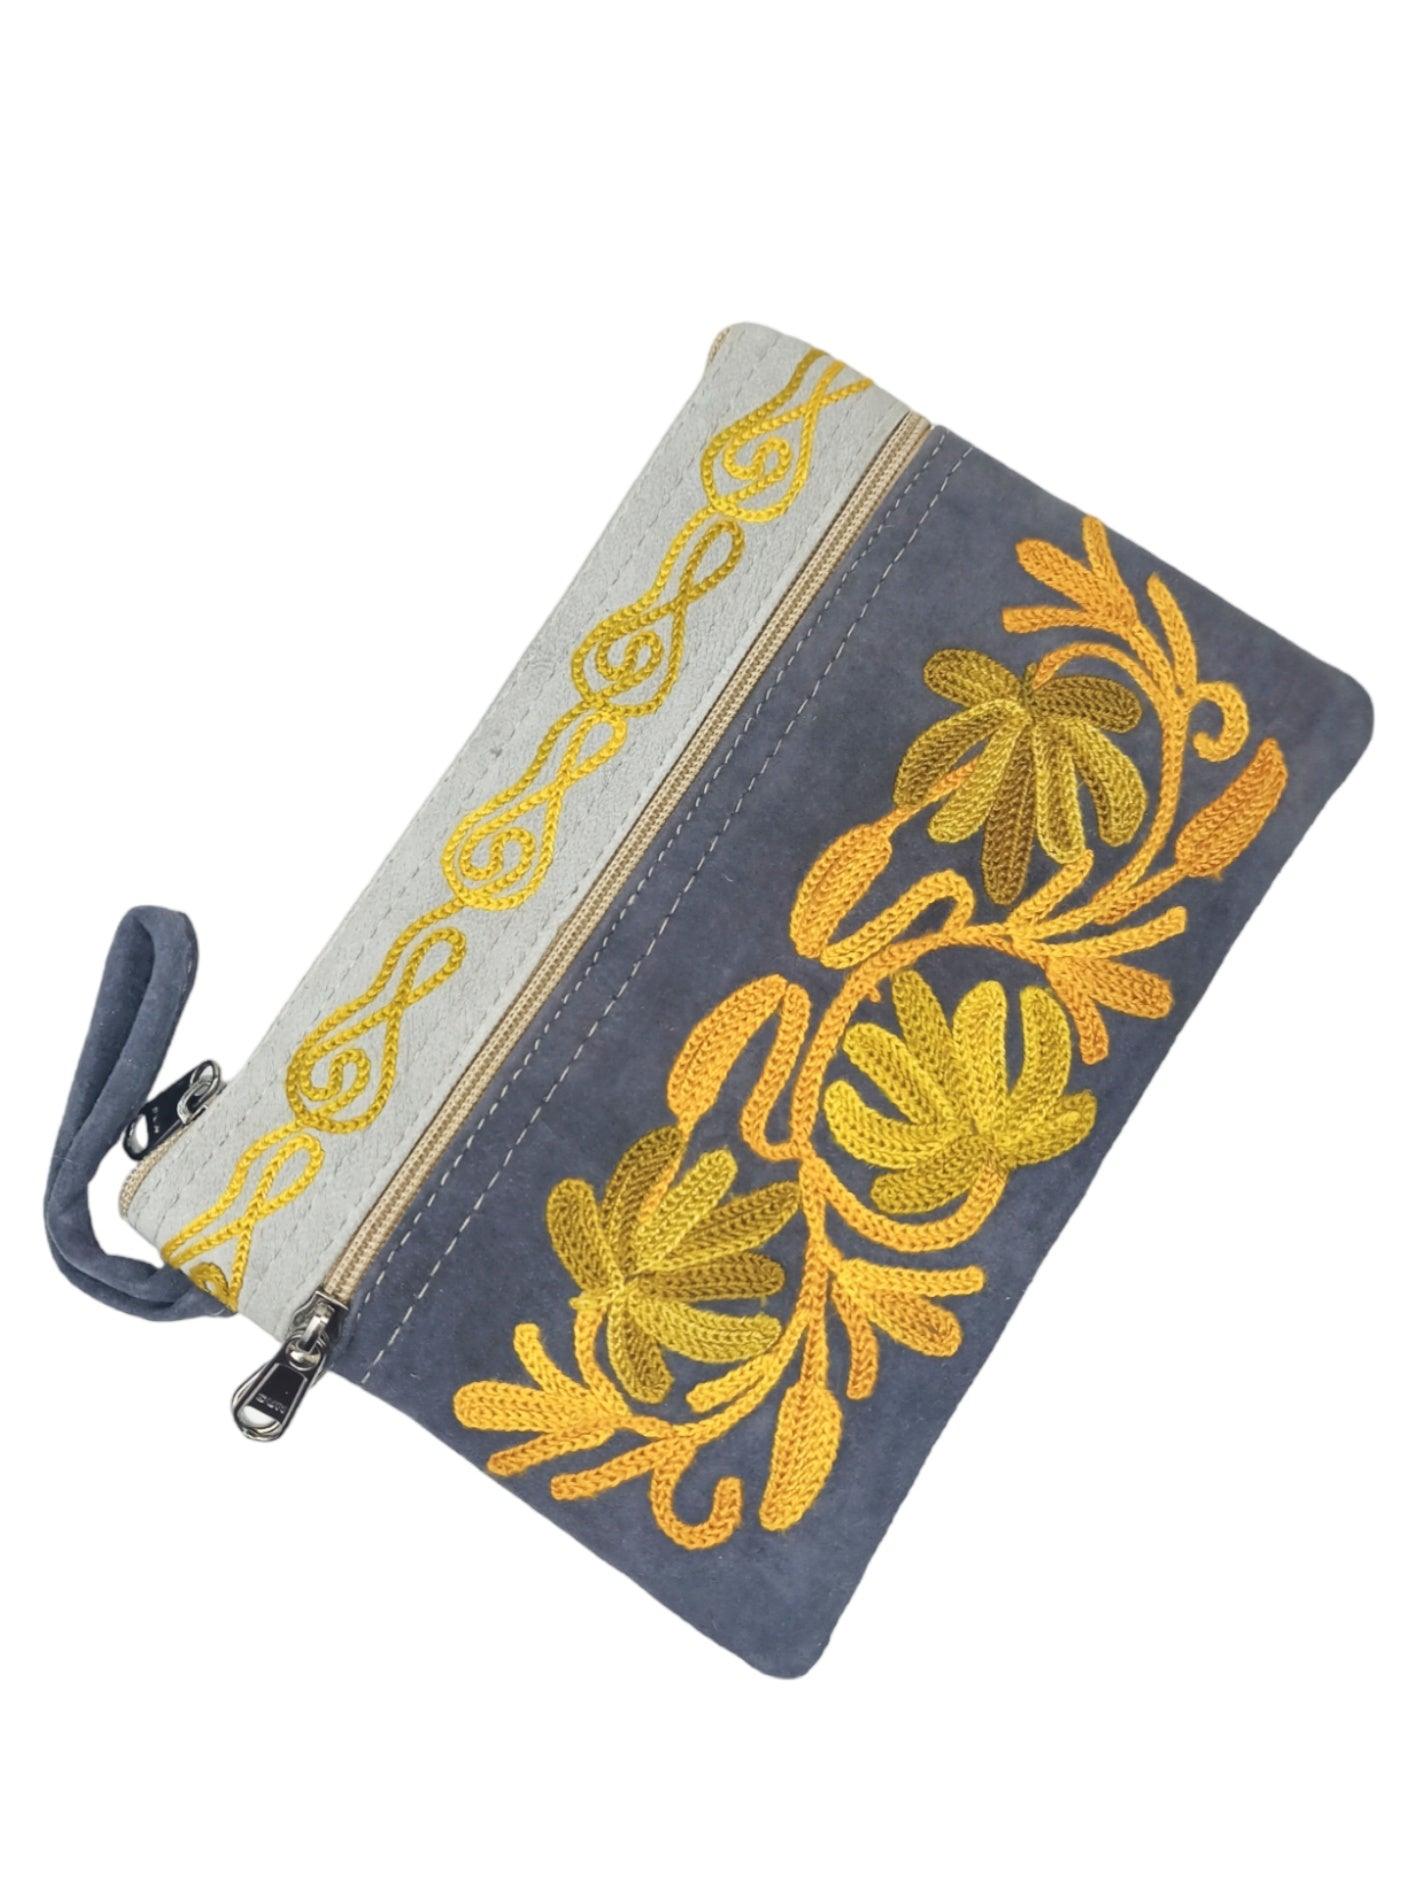 Suede Leather Purse | Aari Hand Purch | 6" 3 Zip Embroidered Purse